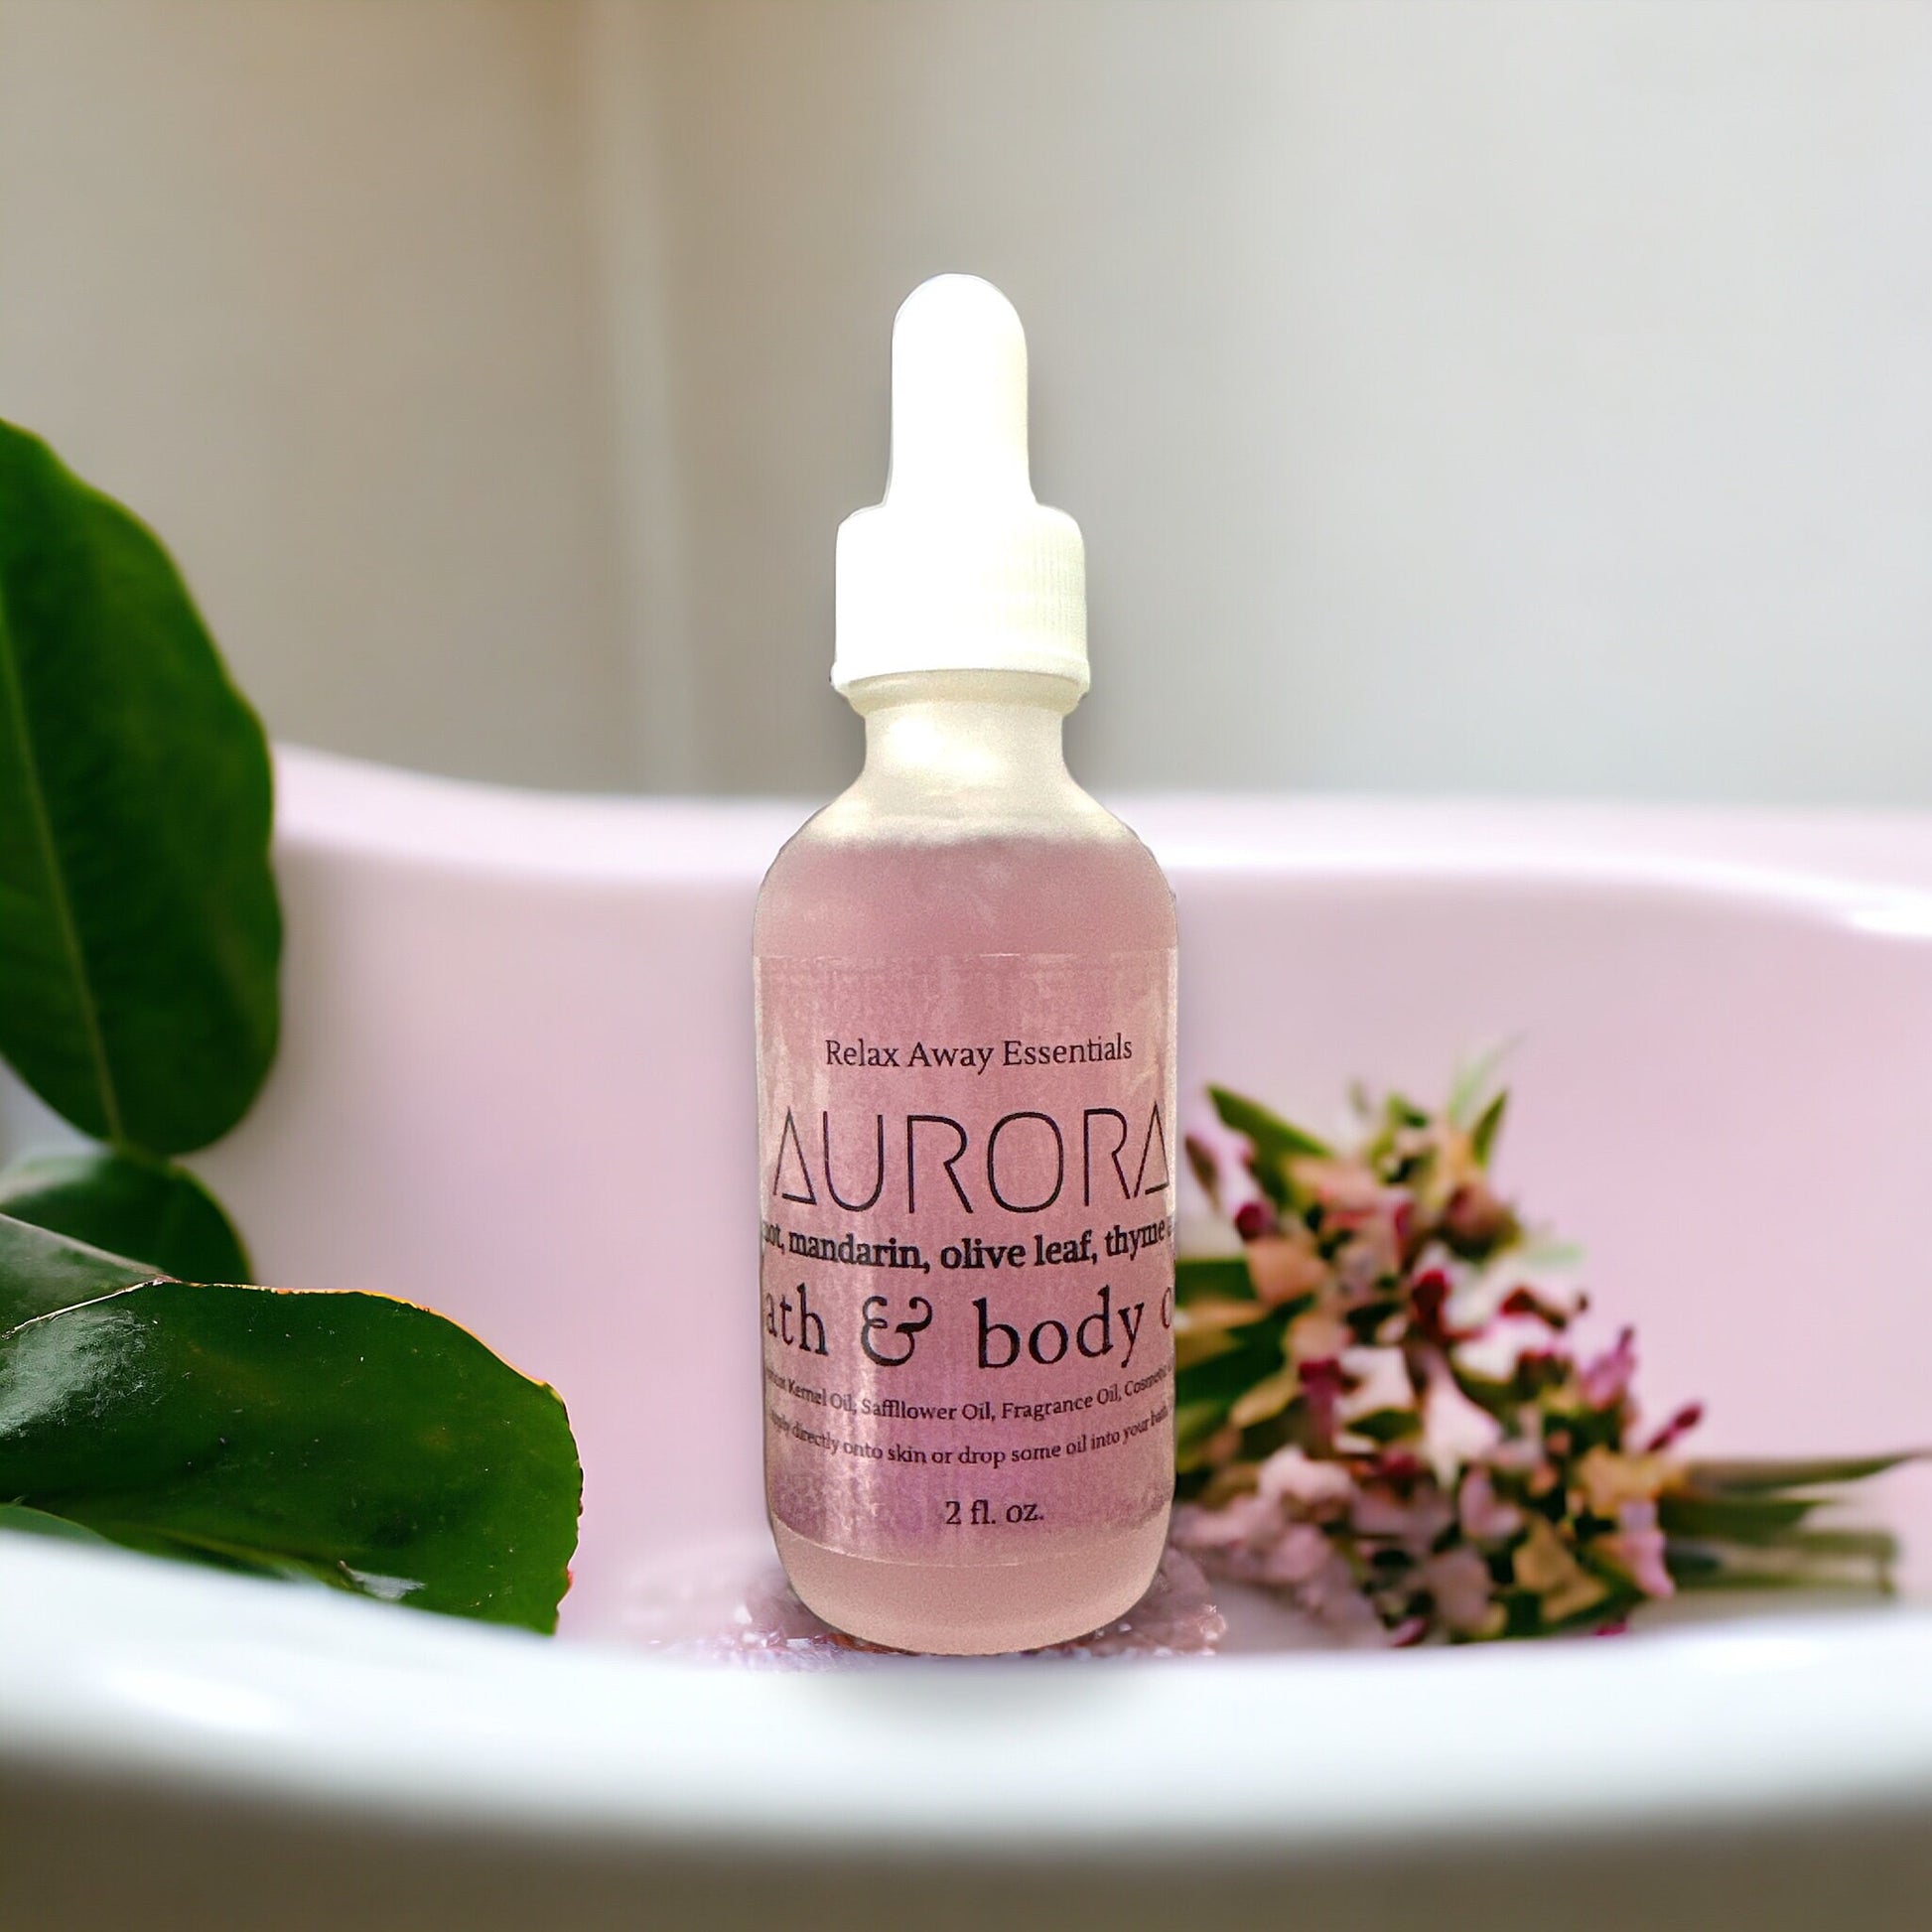 Aurora Bath and Body Oil | Skin Care | Natural Ingredients